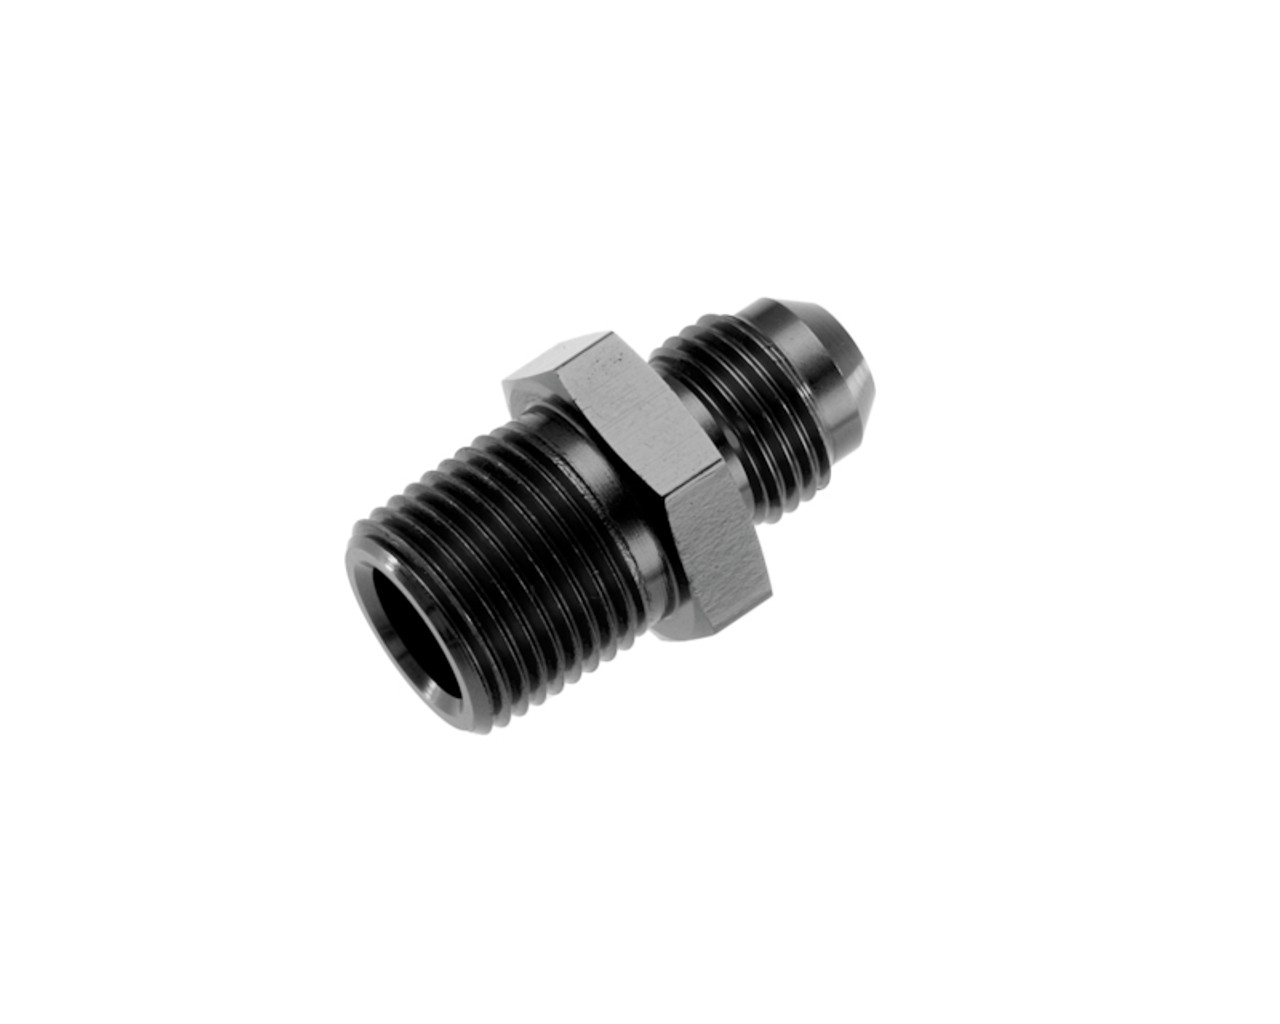 Redhorse Performance -08 straight male adapter to -06 (3/8″) NPT male